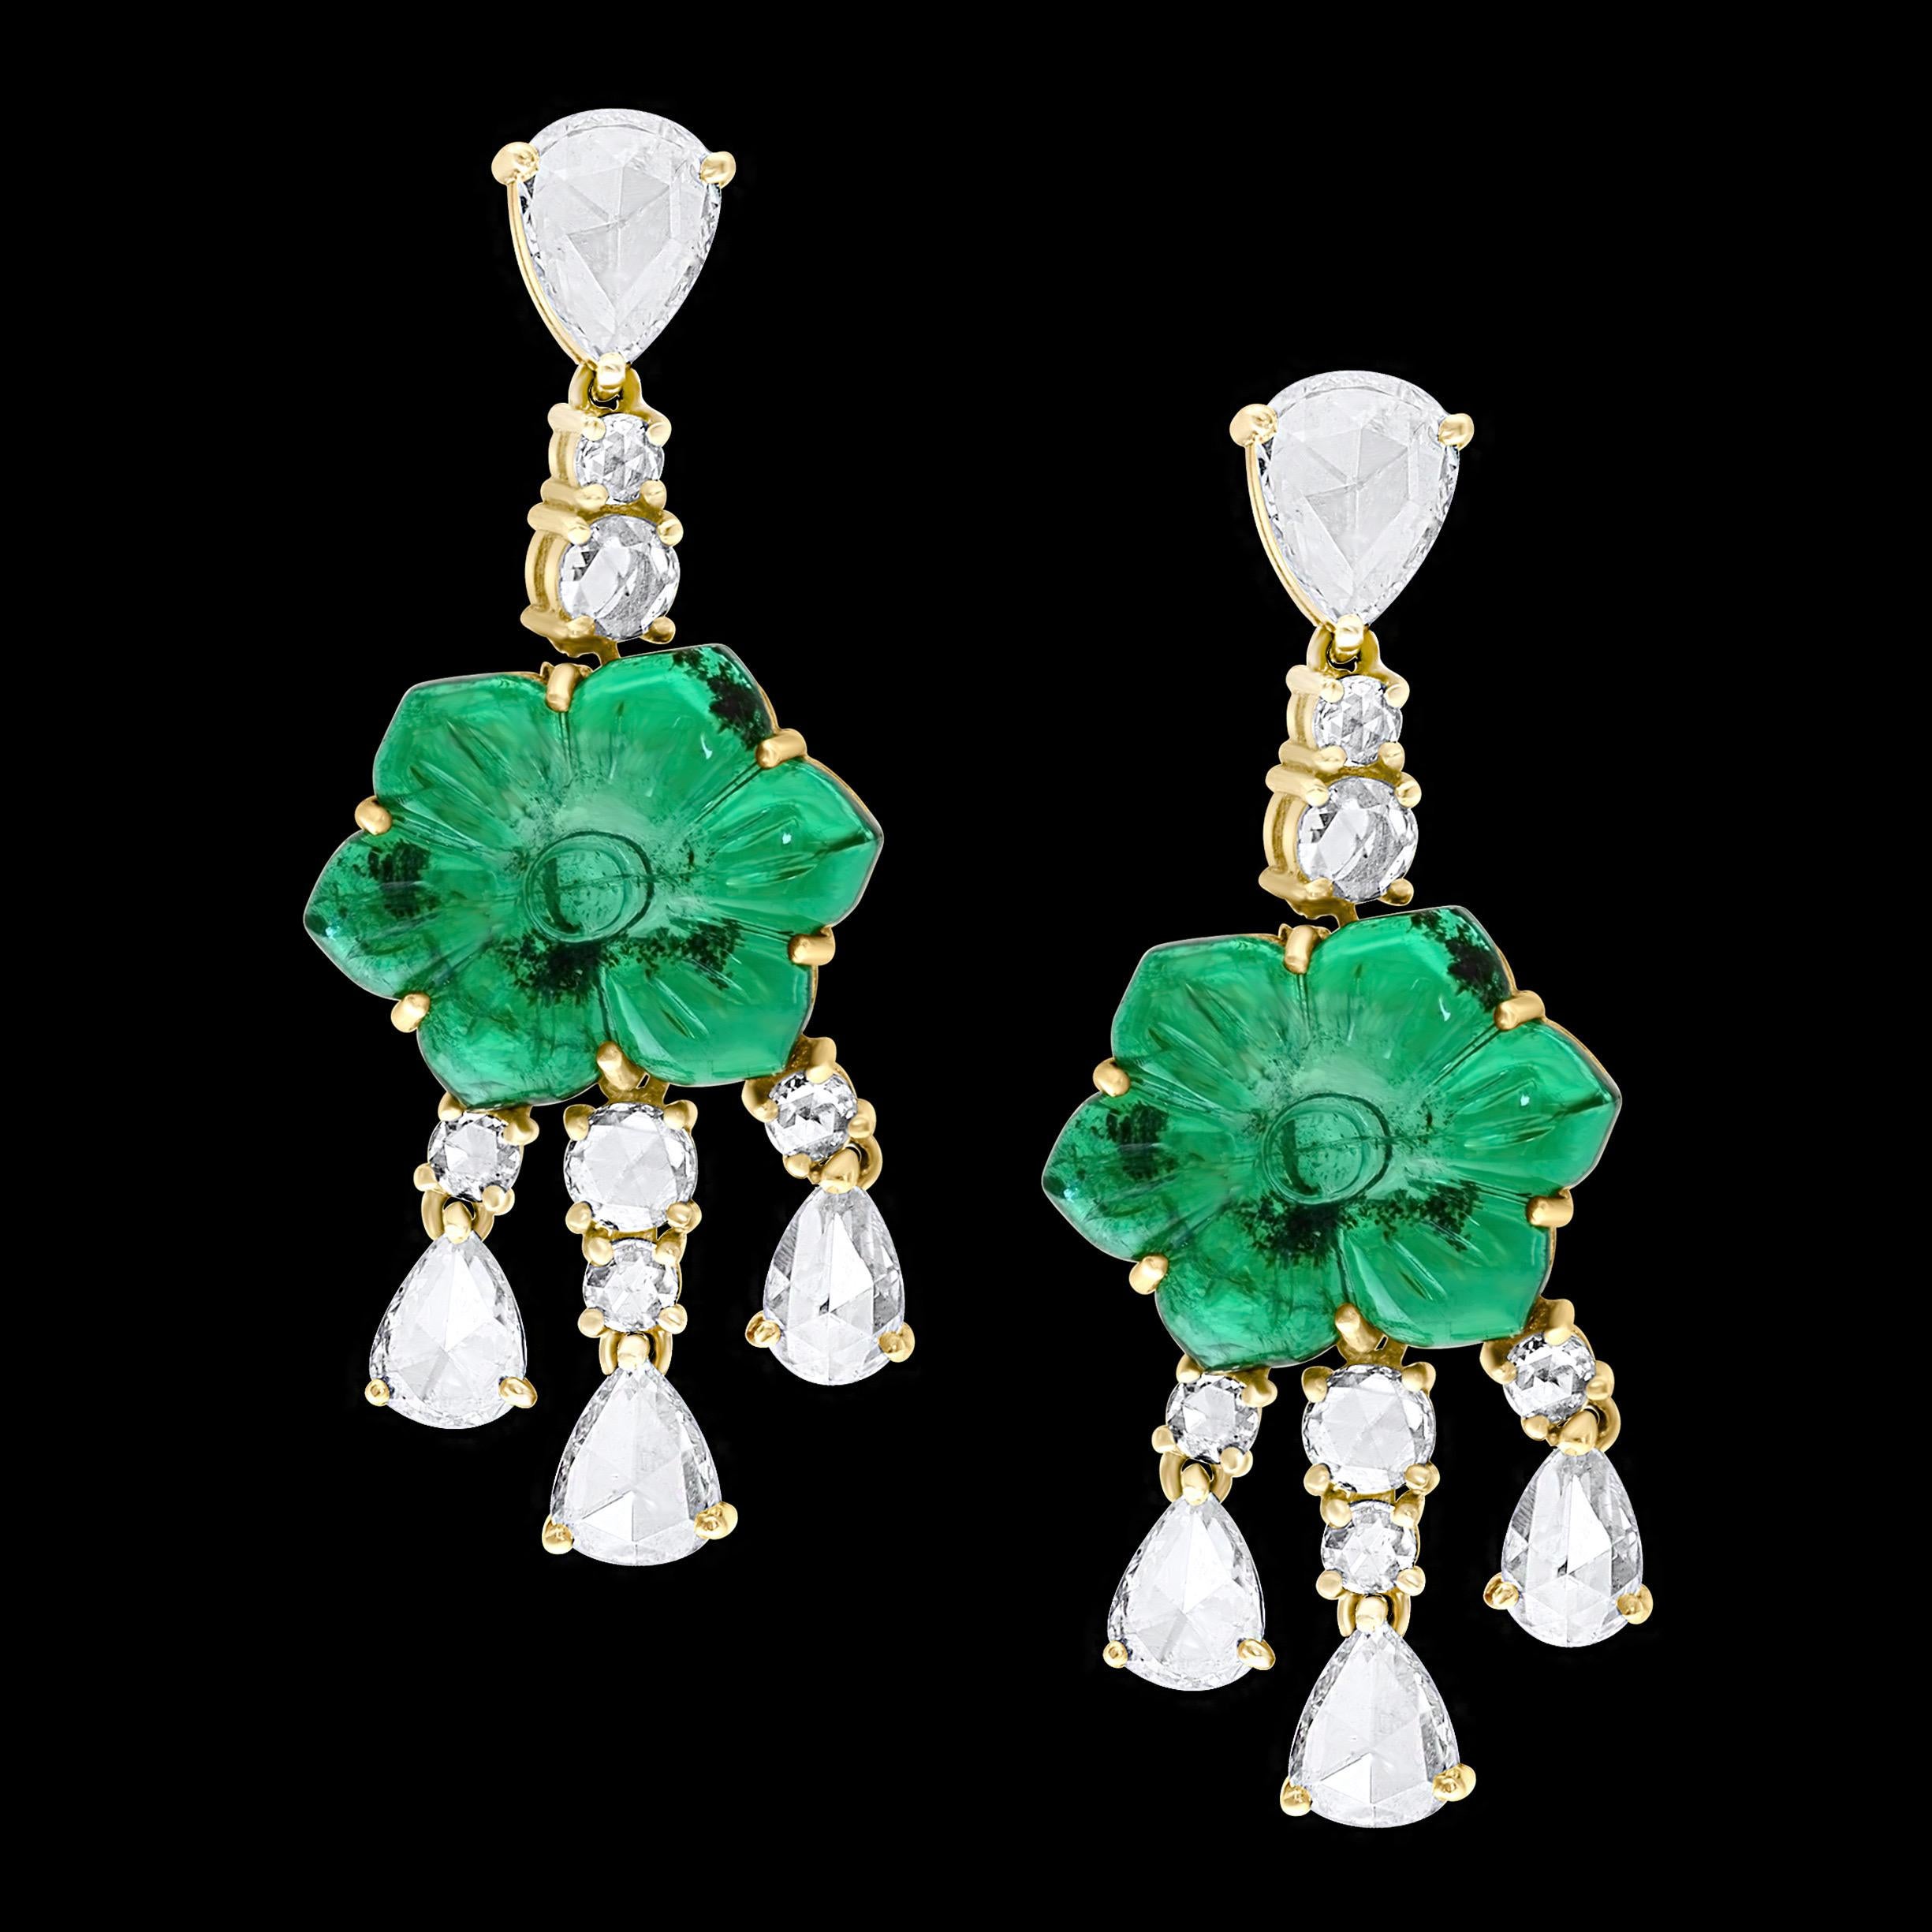 12Ct Carved Emerald & 5 Ct Rose Diamond Dangling Post Earrings 22 Kt Yellow Gold
Discover elegance in our Emerald Diamond Post Earrings crafted with 22 Karat Yellow Gold. The earrings feature two finely carved flower emeralds with an approximate